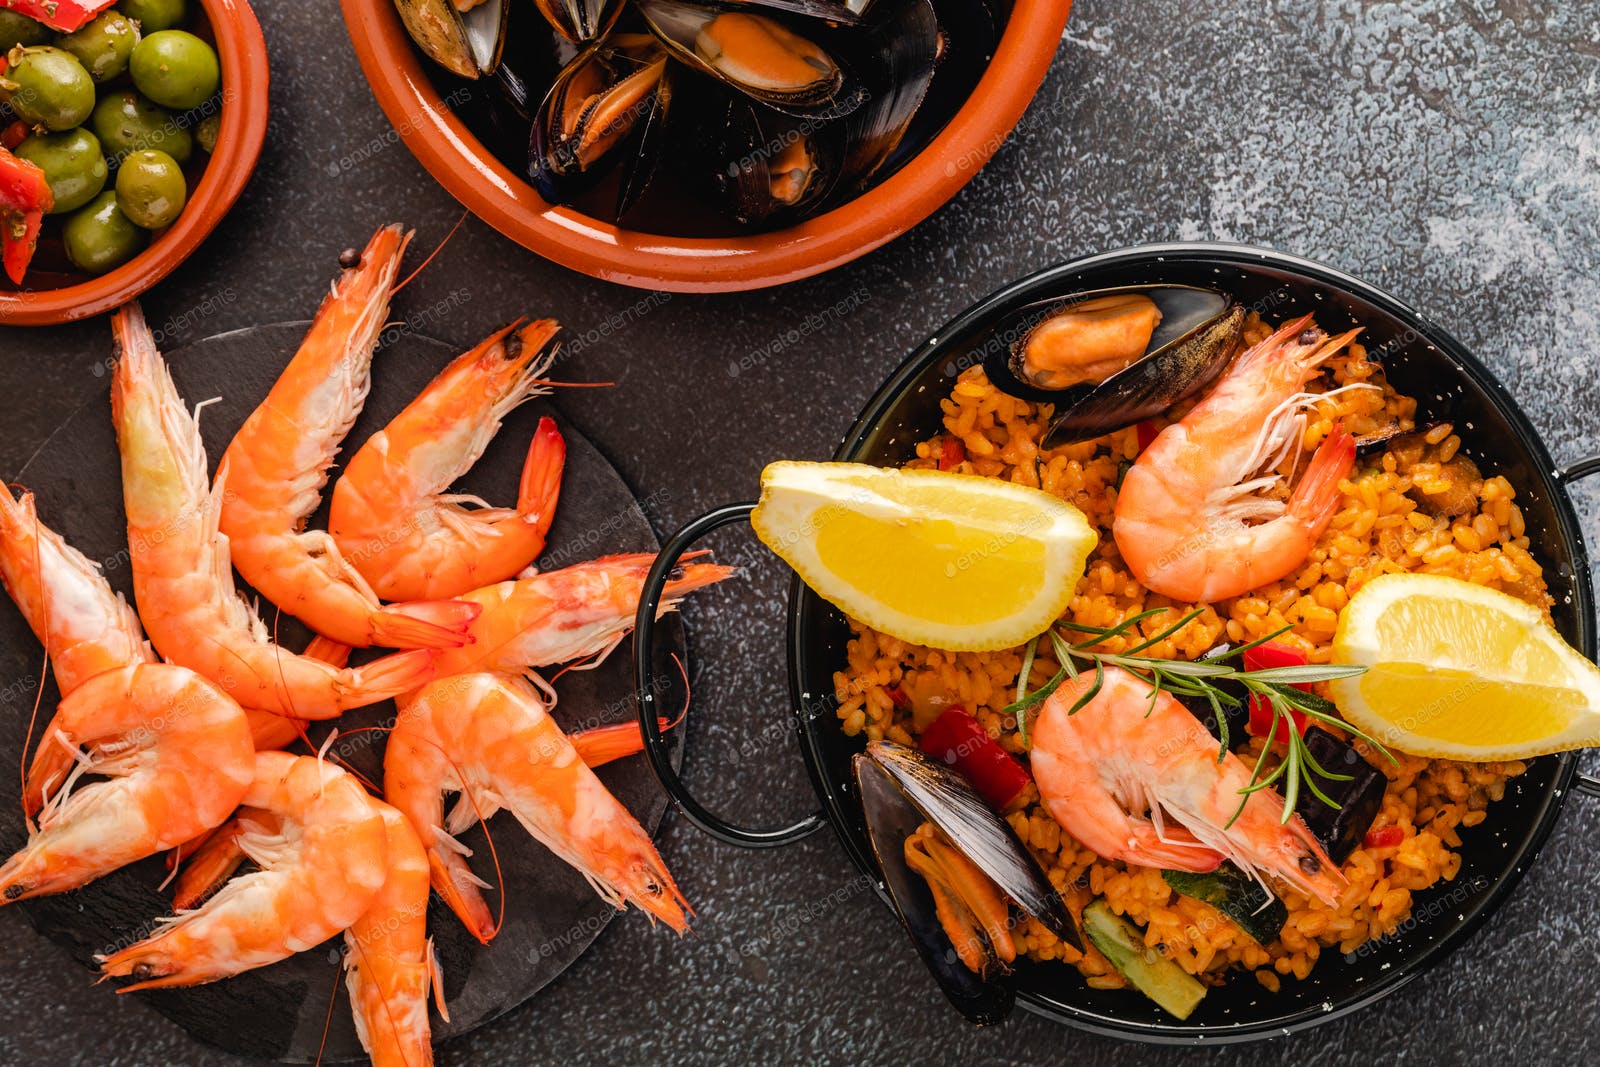 Spanish cuisine: the complete guide for foodies